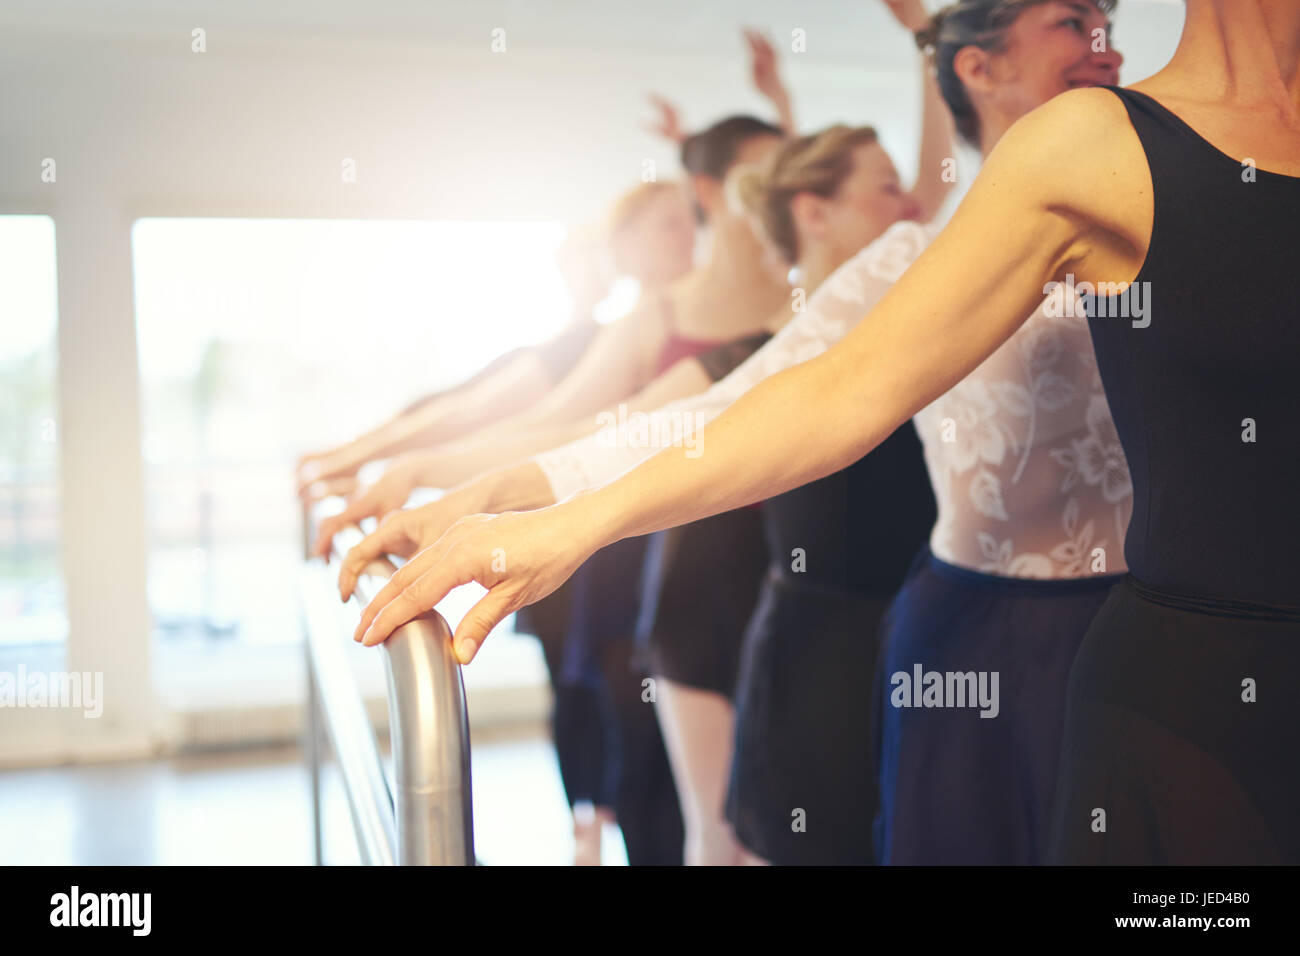 Hands of unrecognizable mature group of women holding handrail while performing a ballet in class together. Stock Photo